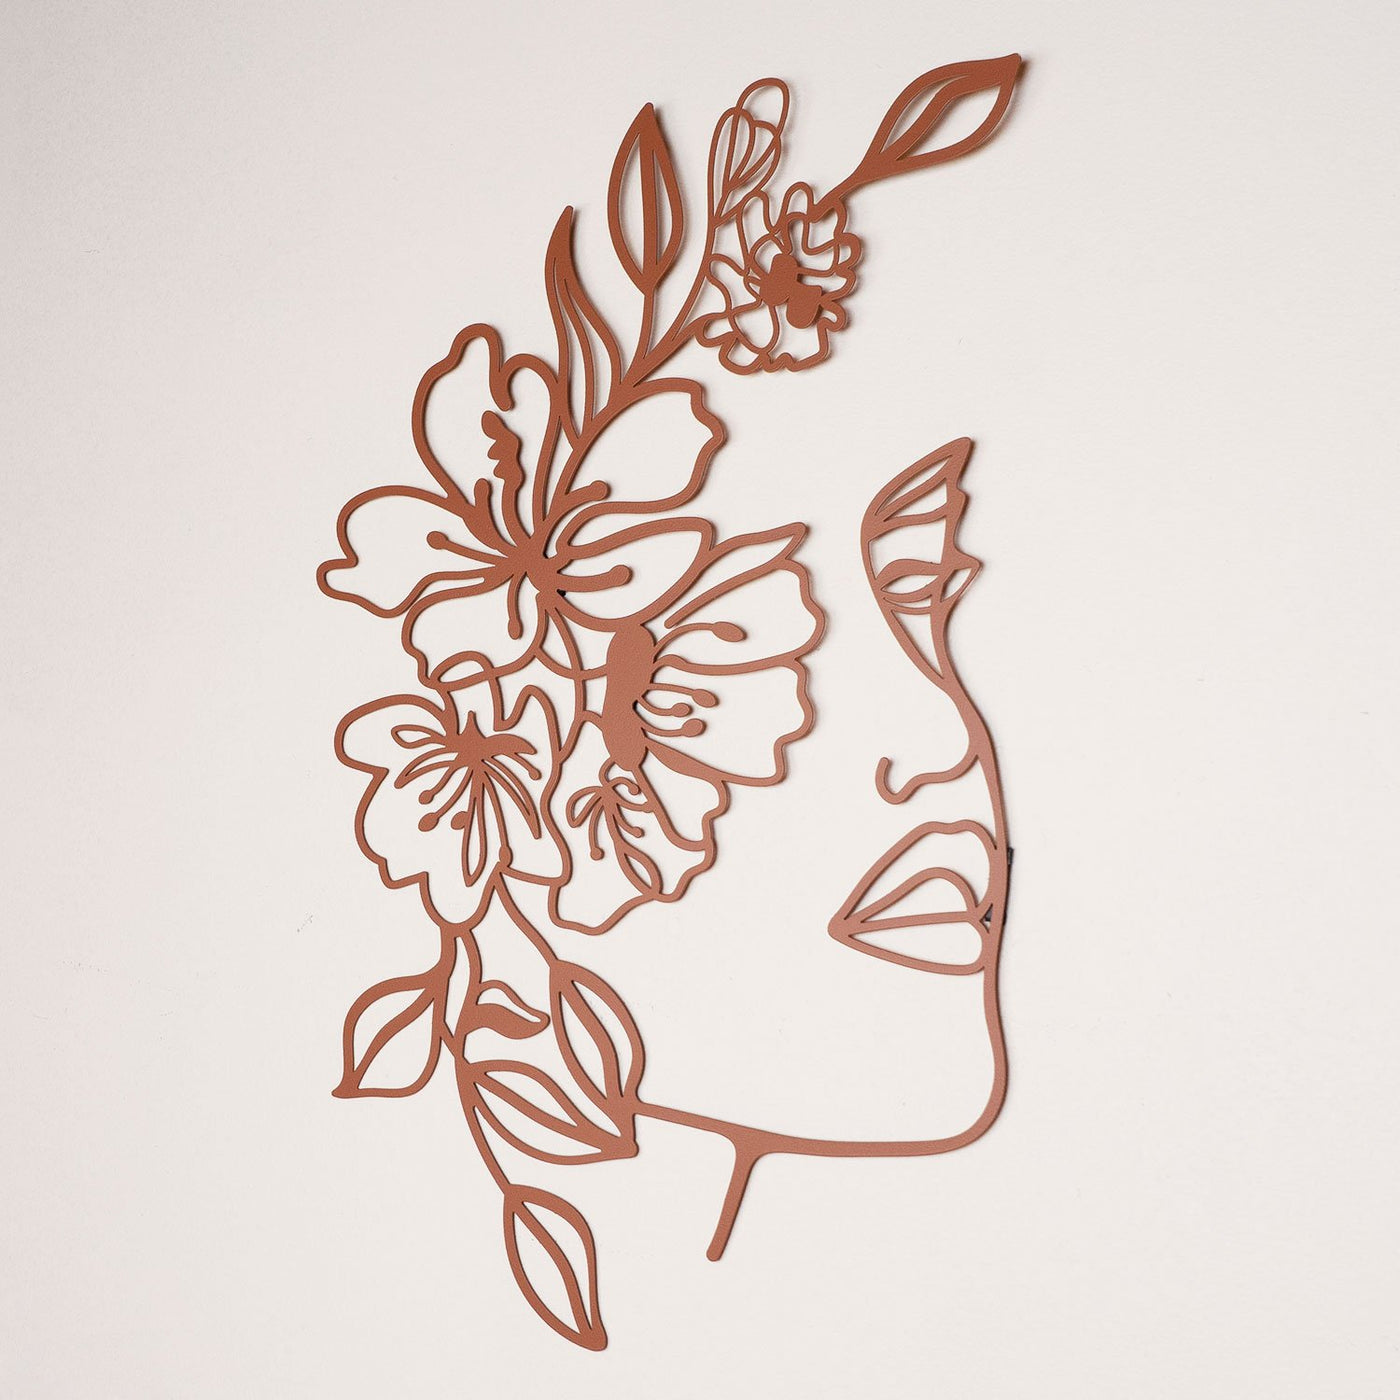 Floral Face, Flowers, Journey, Inspiration, Wall Art, Accessory, Soul